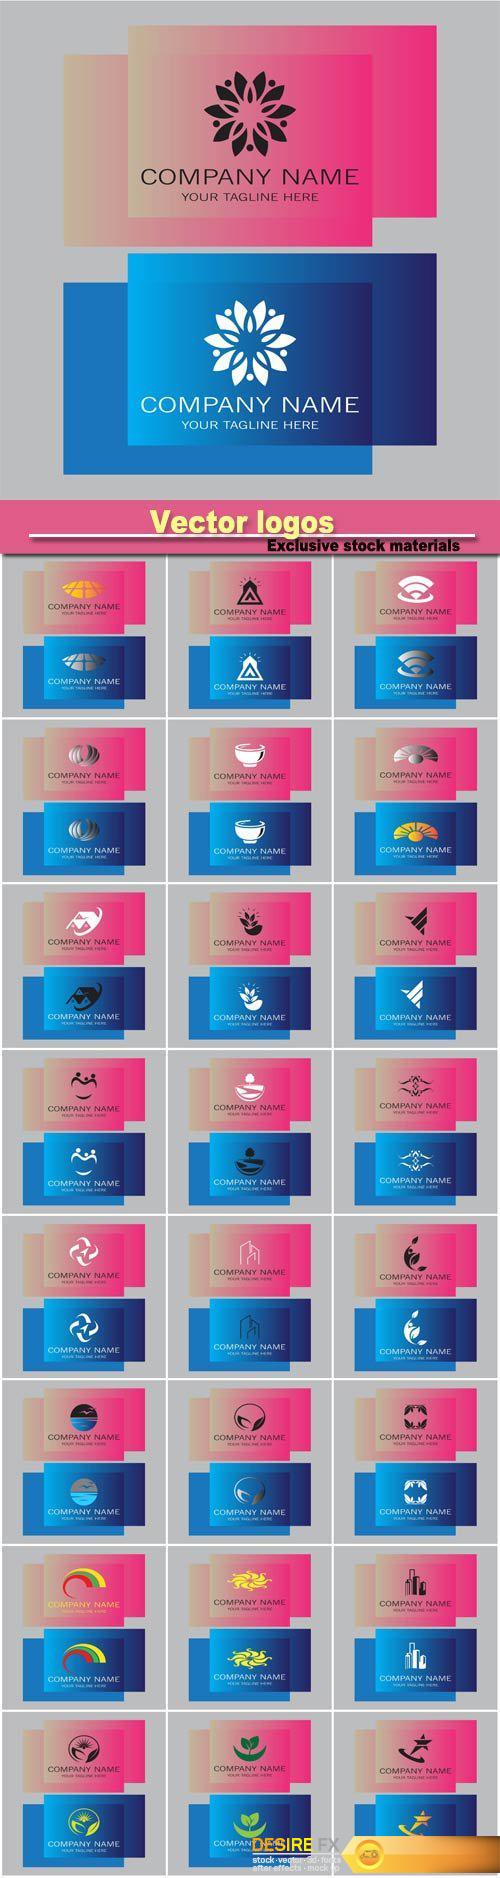 Vector business logos on the pink and blue backgrounds